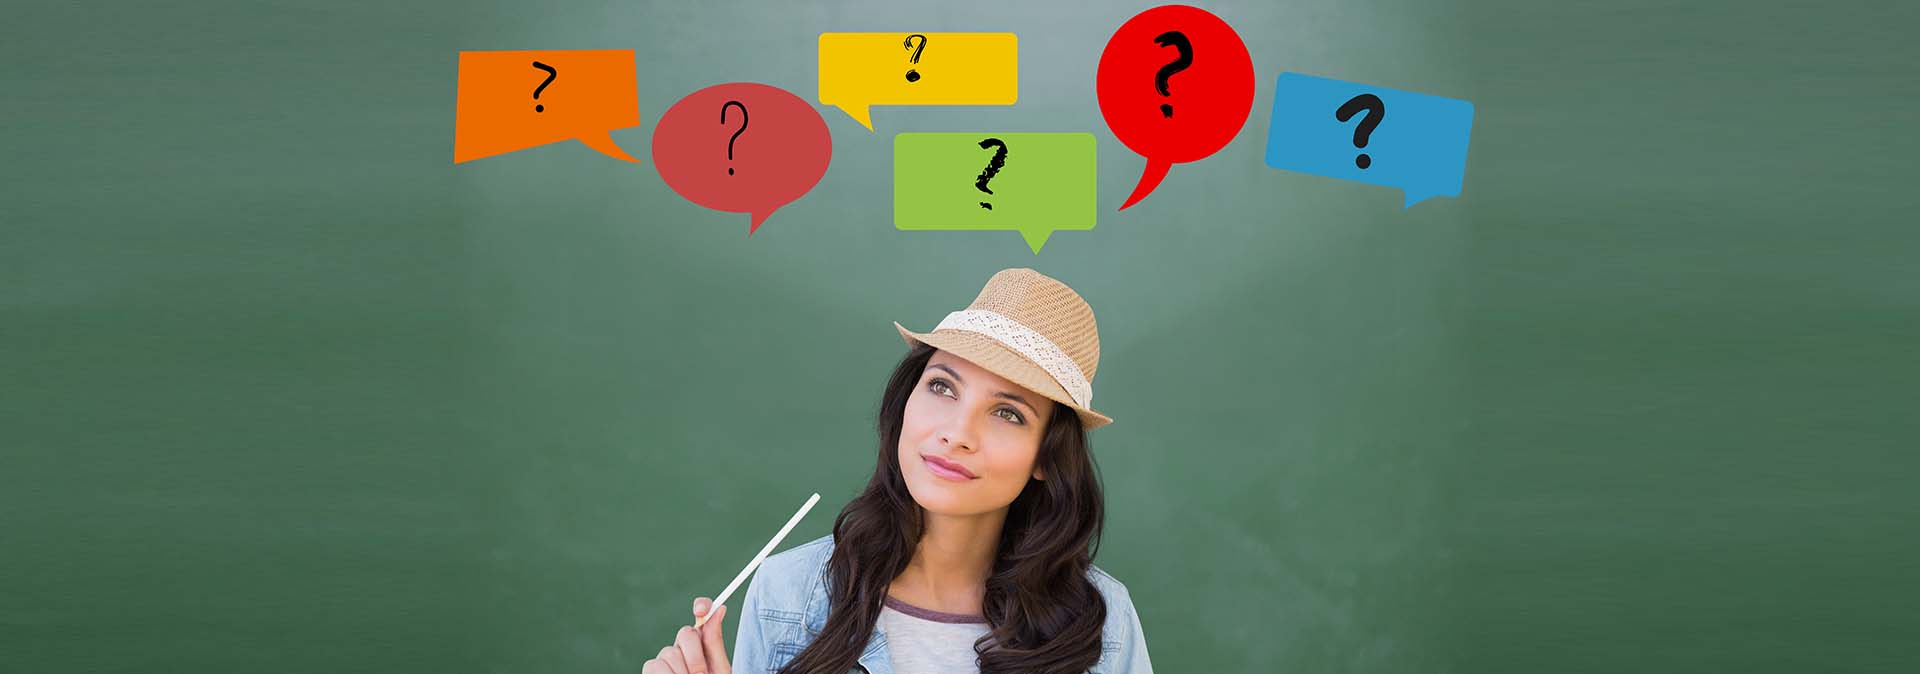 5 questions to ask yourself before considering a cosmetic procedure?